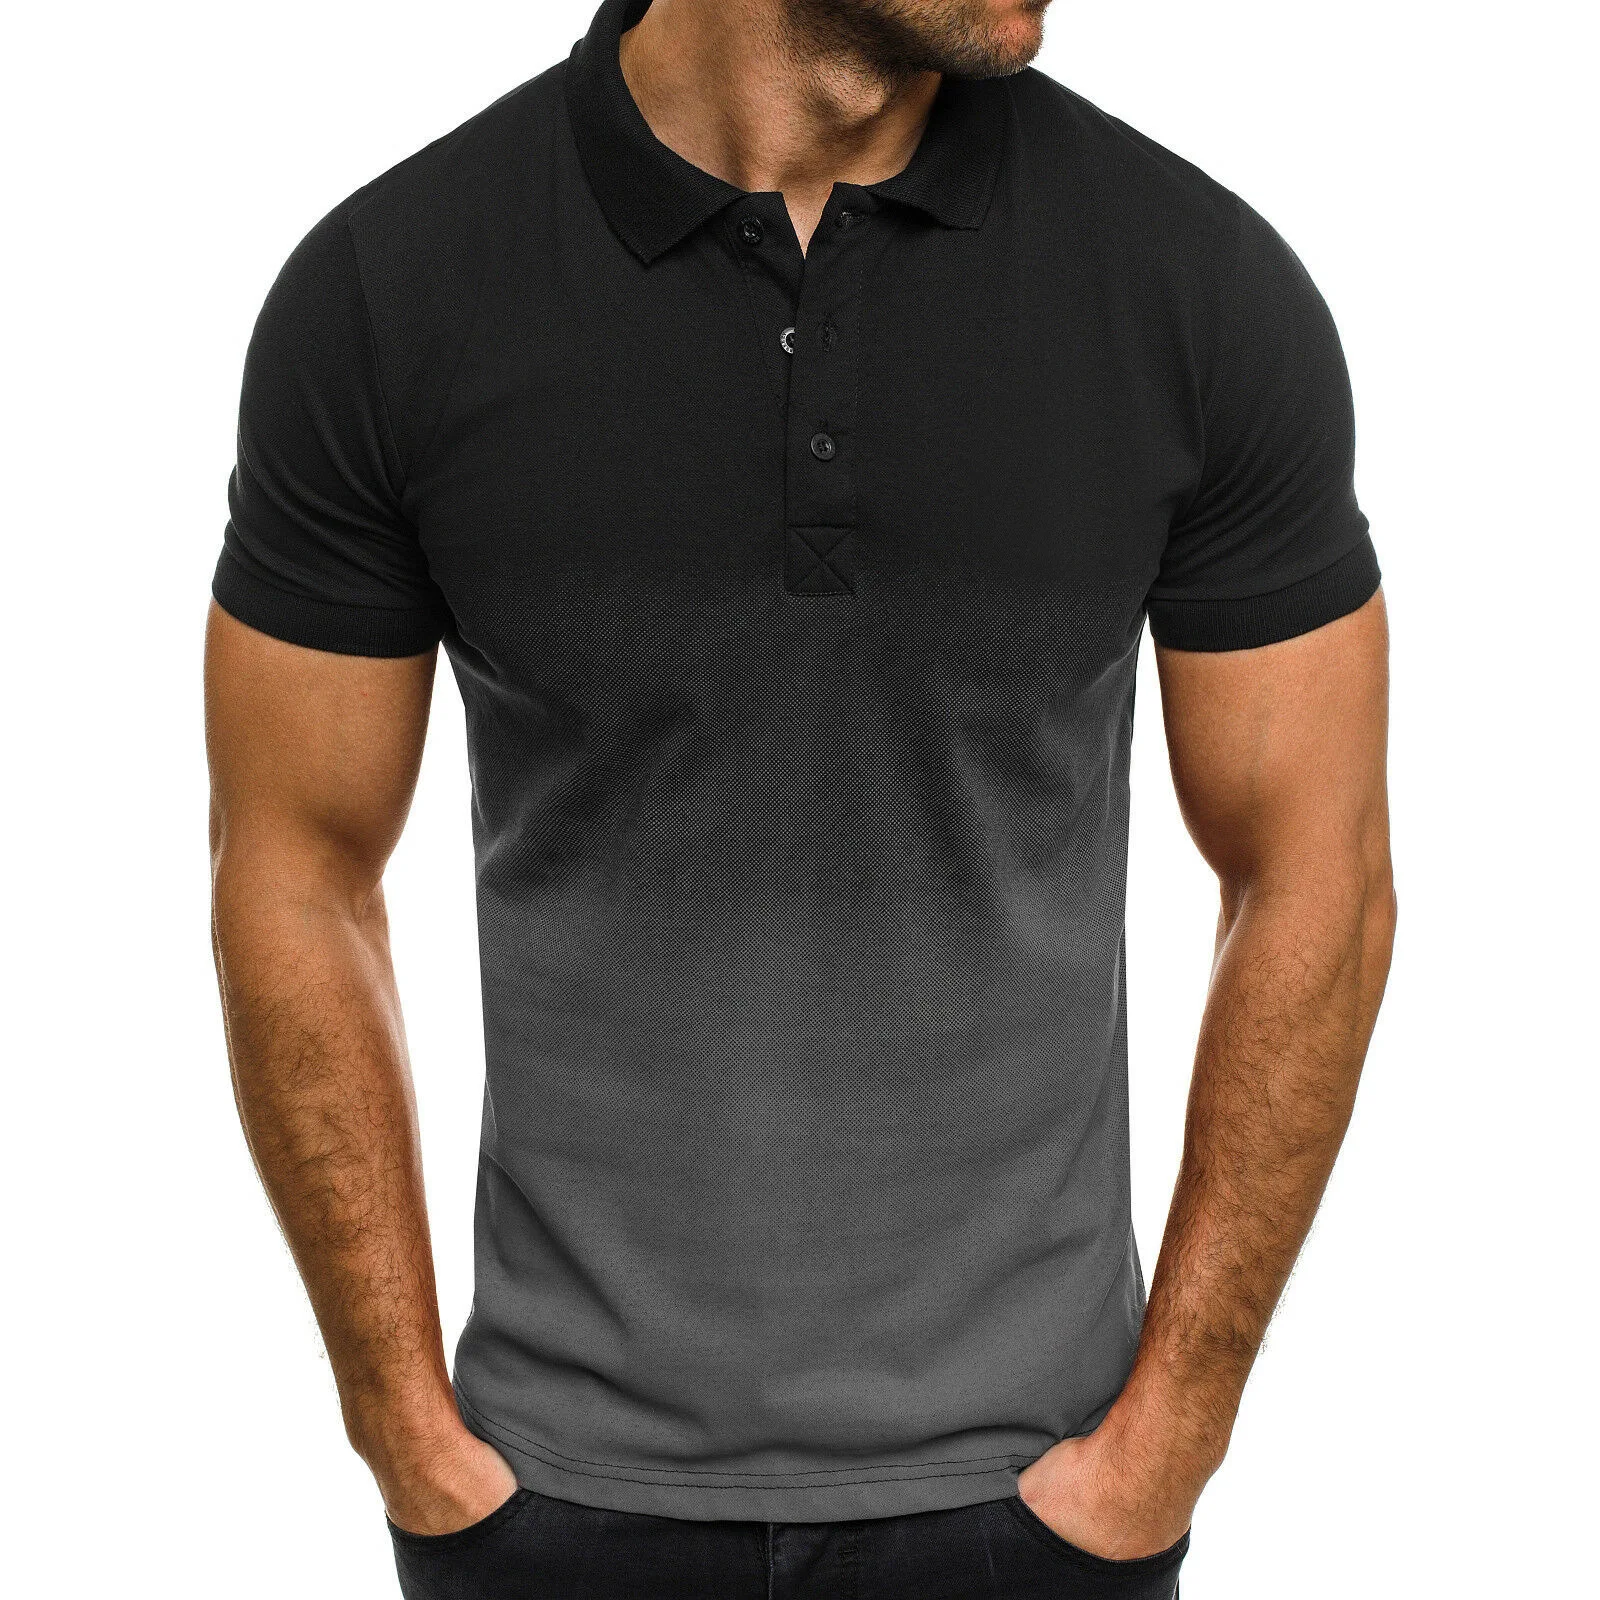 Mens Polos 2022 New POLO Shirts Men Business Slim Short Sleeve Lapel T  Shirt High Quality Male Brand Clothing Summer Vintage Casual Tops T230523  From Right_brands_store, $10.41